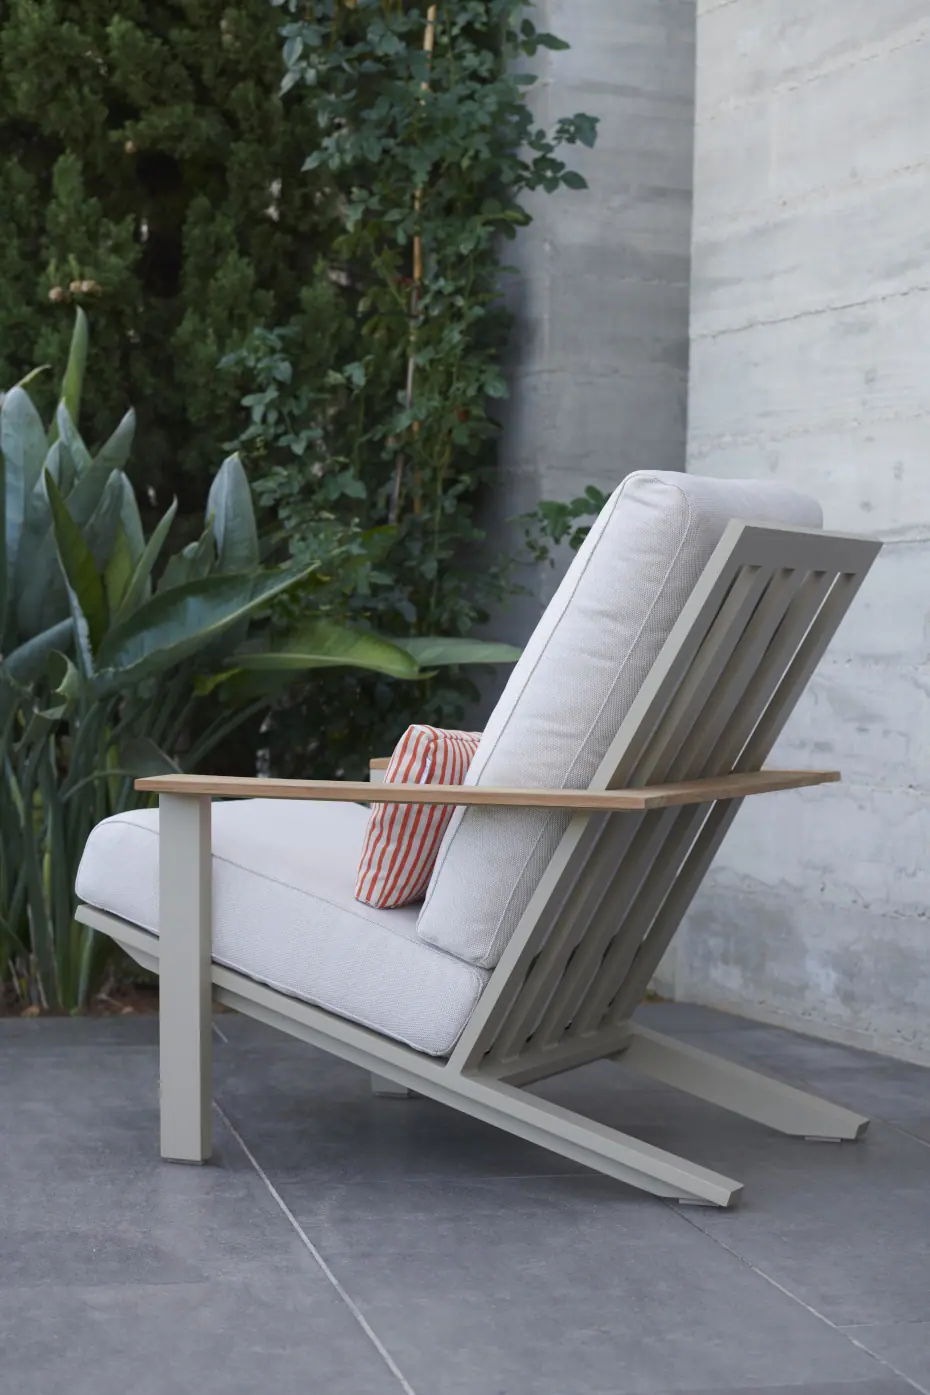 66797-31683-outdoor-lounge-furniture